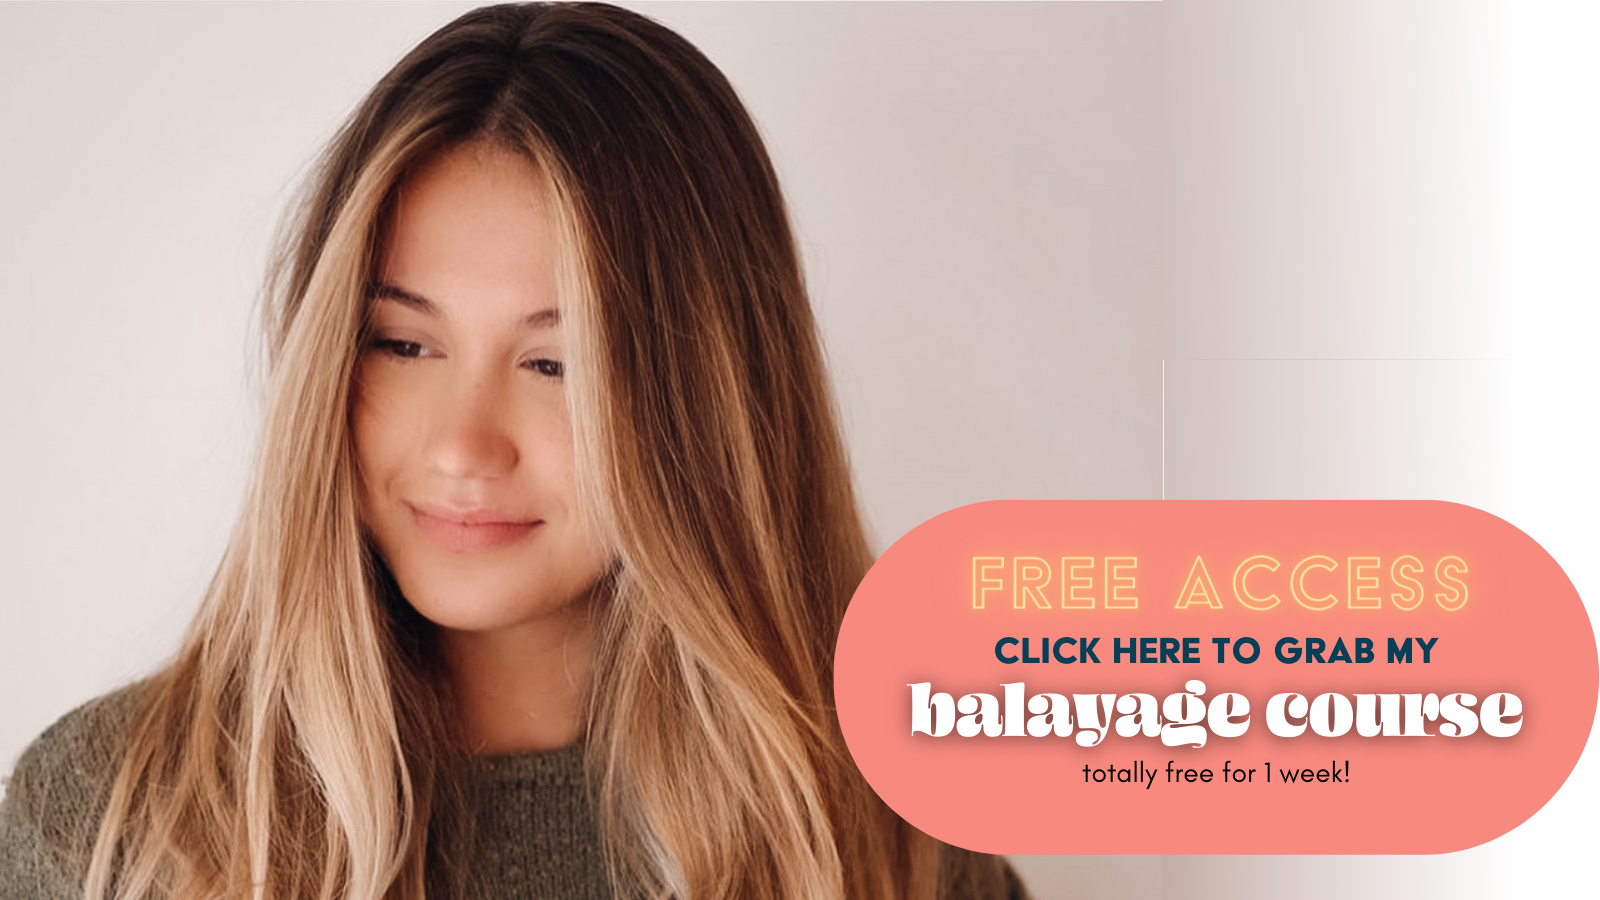 A blonde-brunette woman stands in front of a white background gazing dreamily off into the distance. Text overlay reads "Free access click here to grab my balayage course totally free for 1 week!"